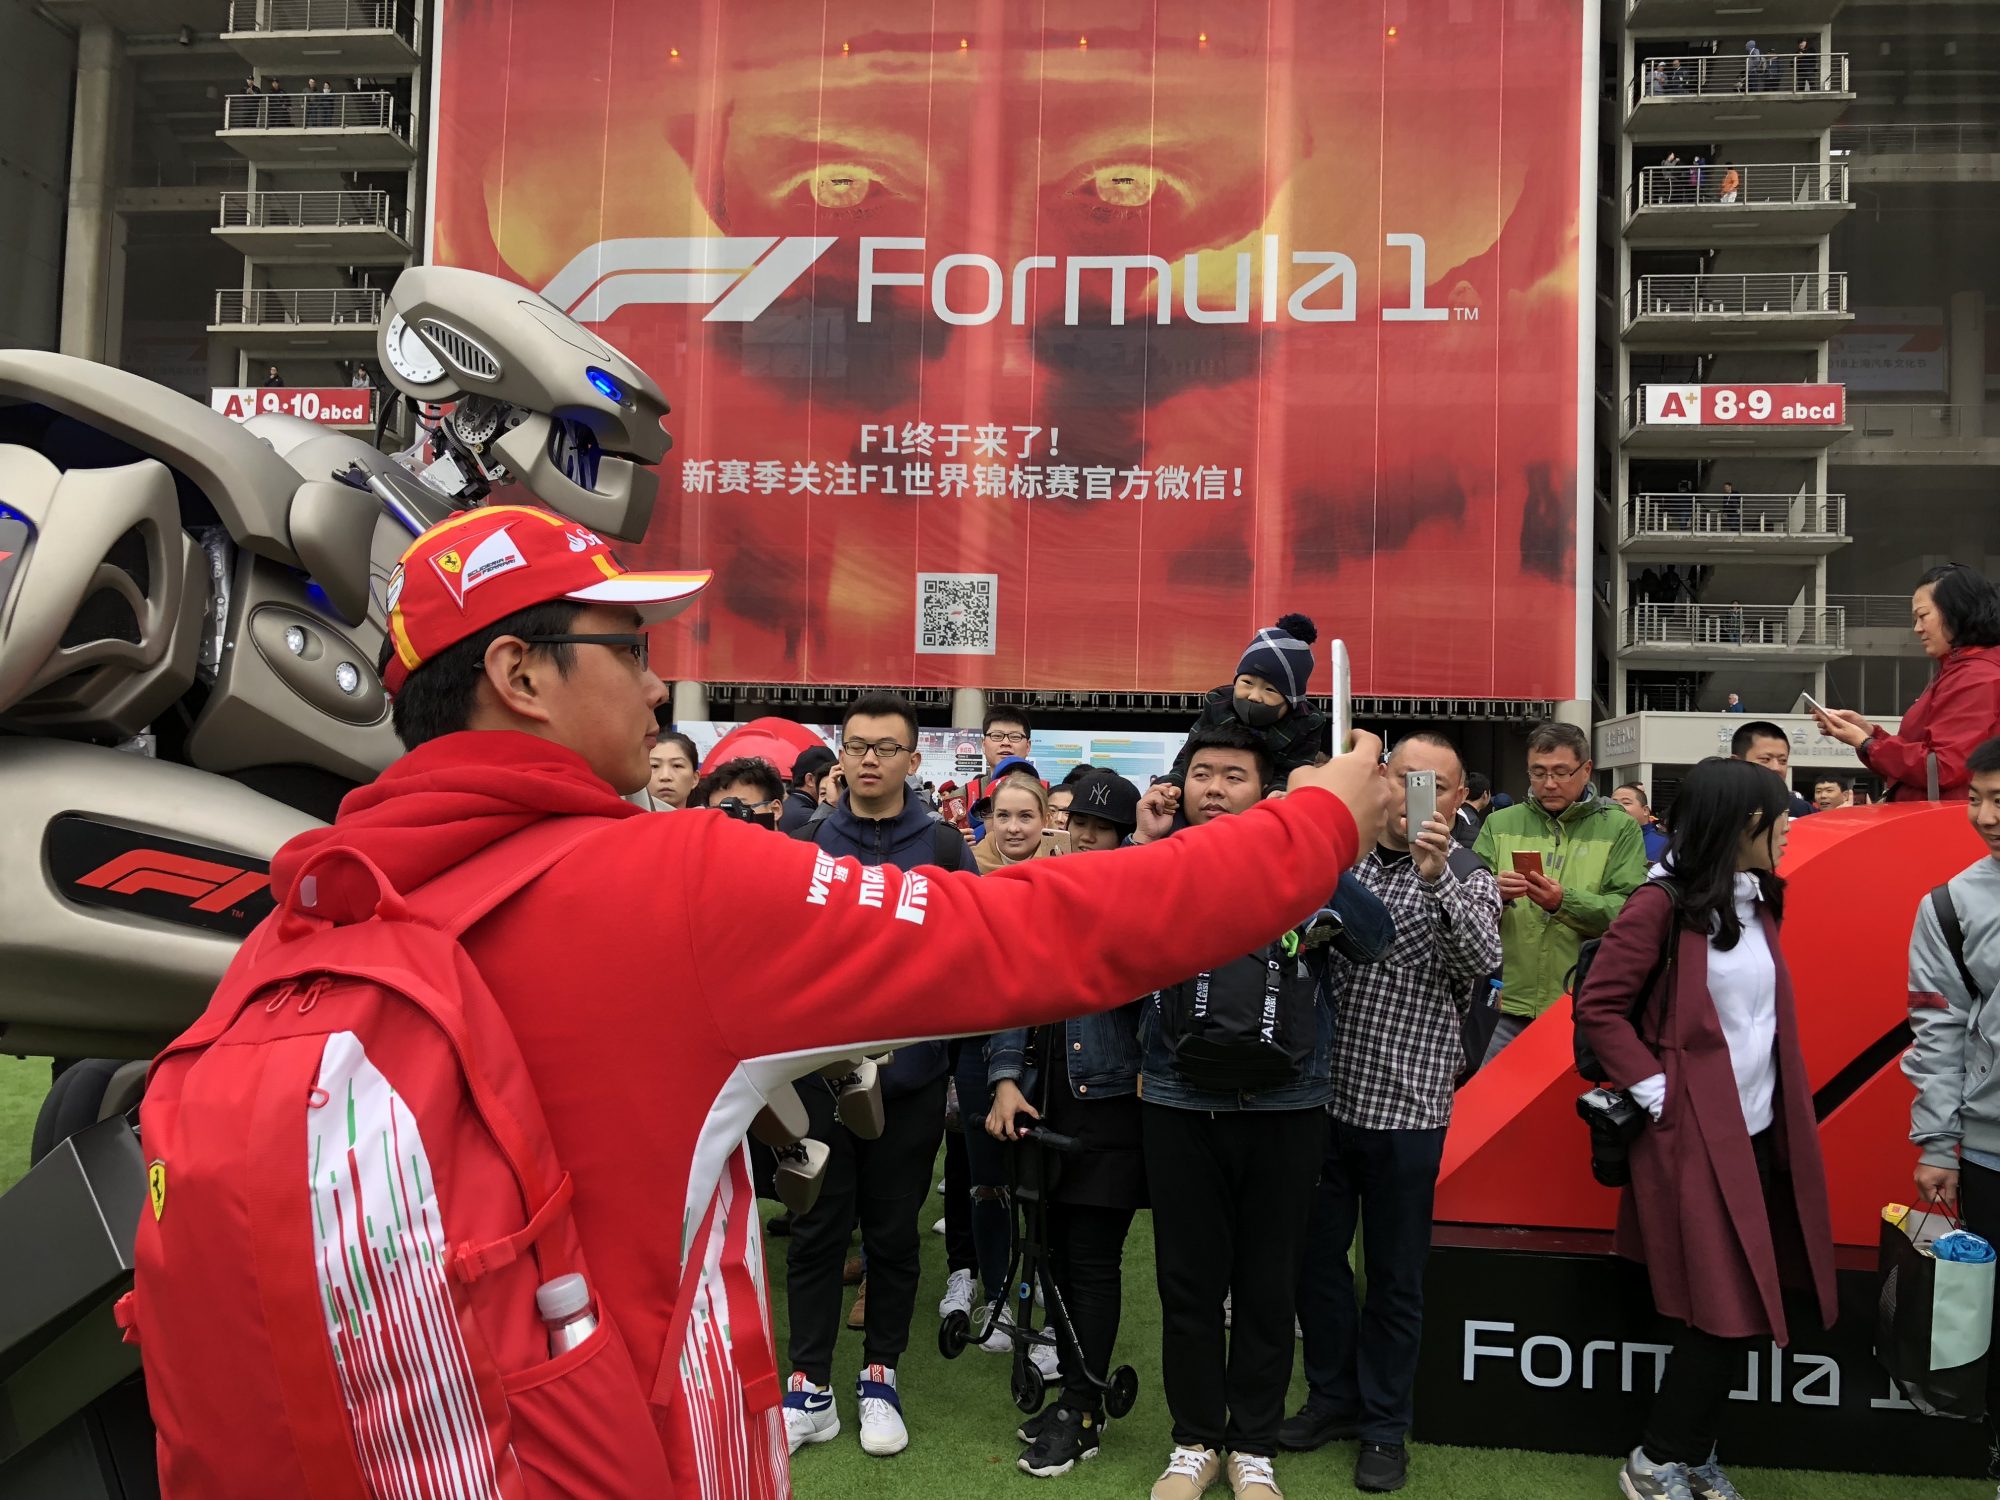 Titan the Robot posing for selfies at the Shanghai F1 Grand Prix in China.